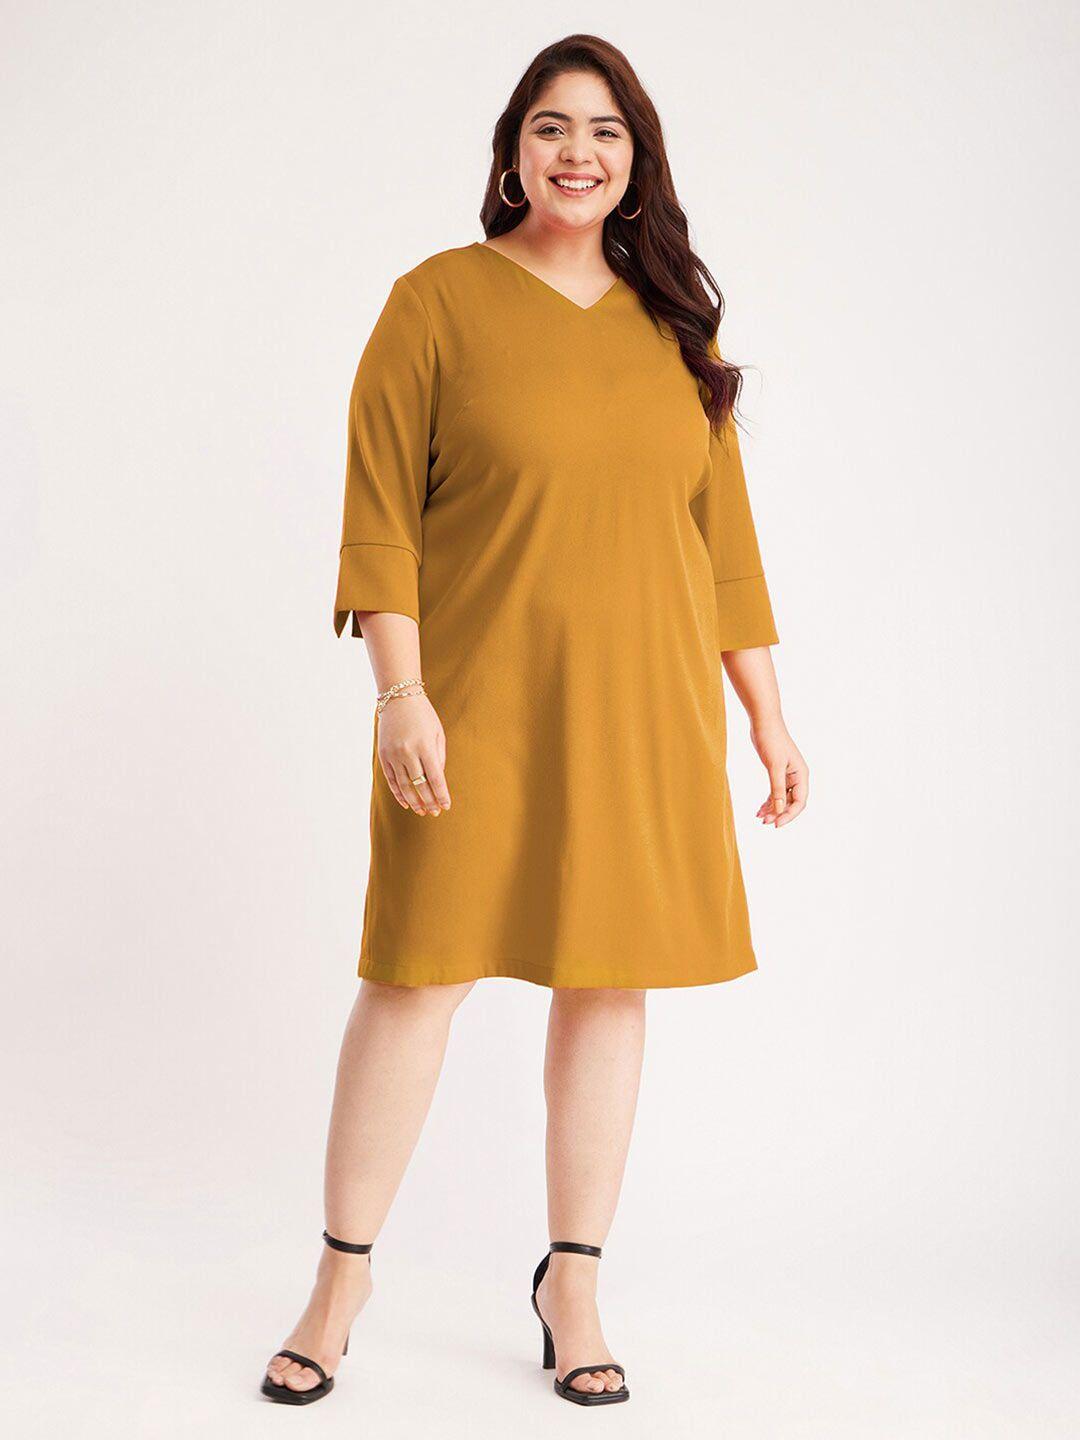 fablestreet x plus size v-neck regular sleeves knee length a-line dress with attached belt